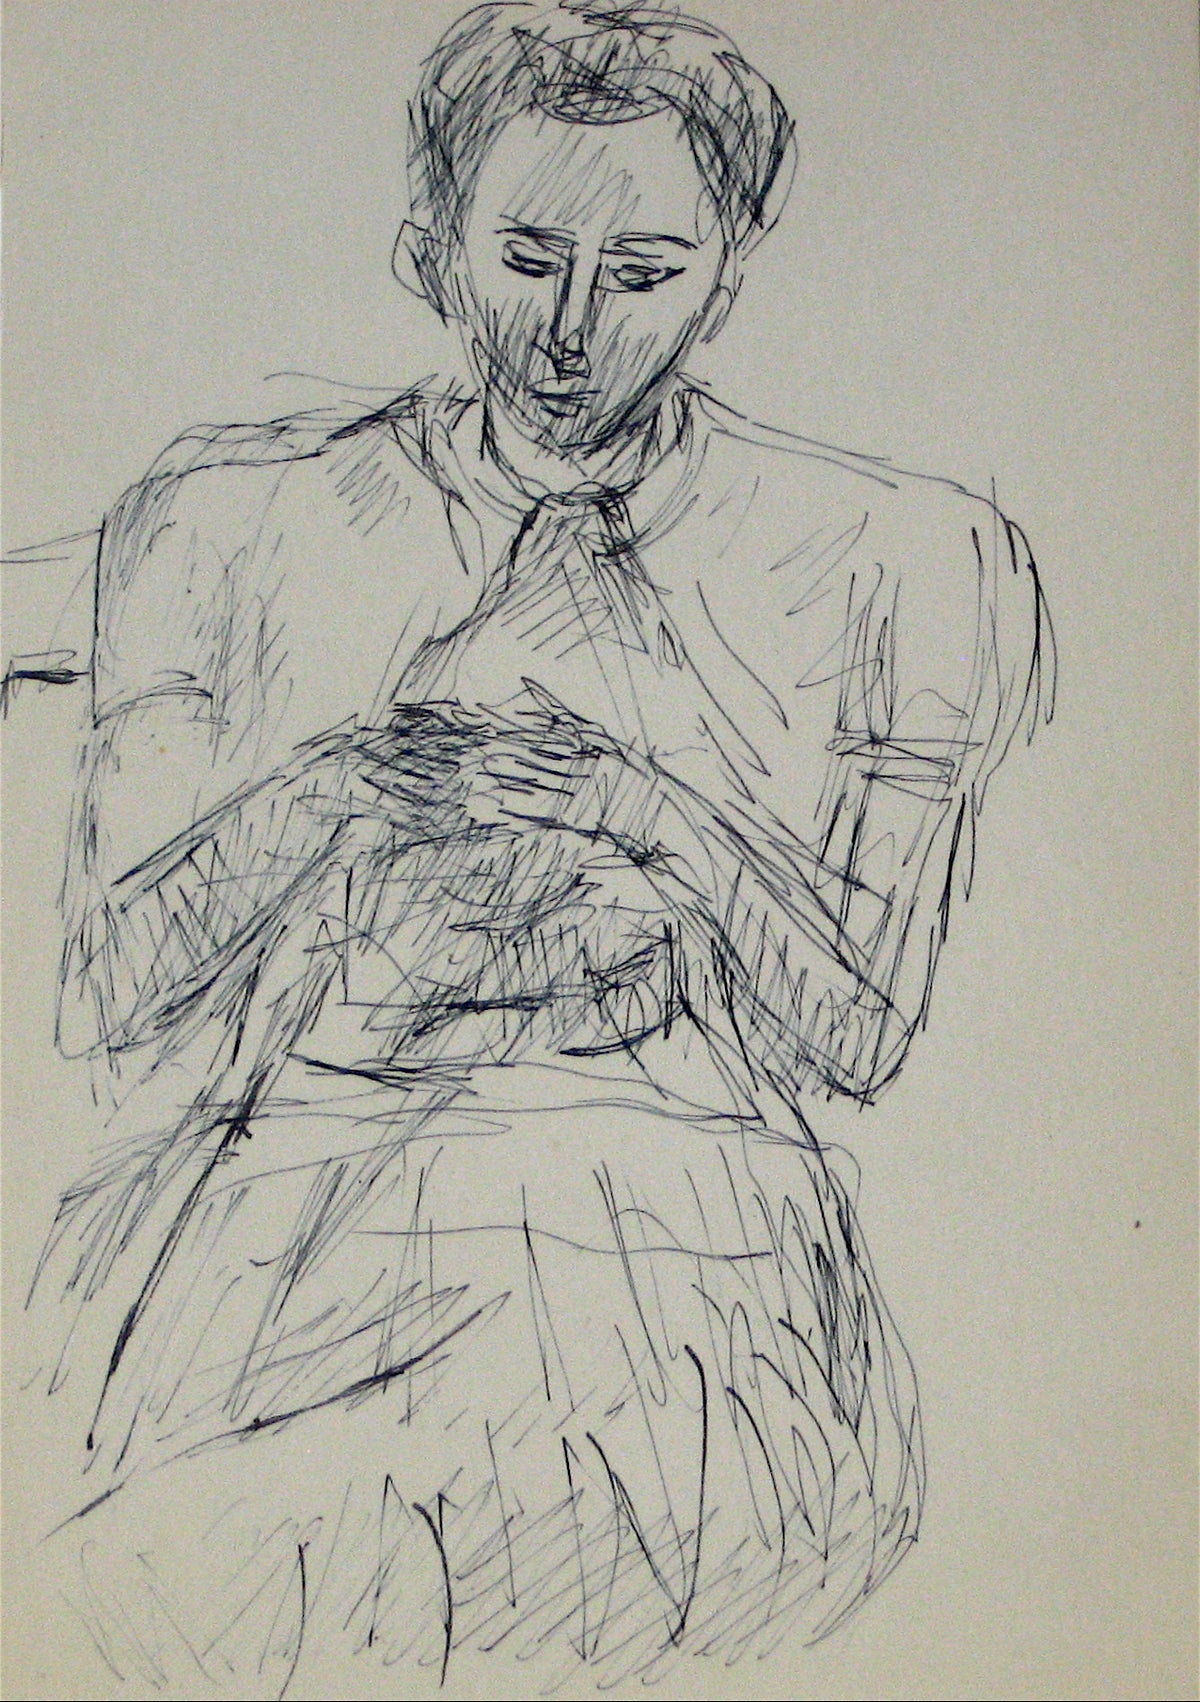 Portrait of a Seated Woman&lt;br&gt;Early-Mid 20th Century Ink&lt;br&gt;&lt;br&gt;#12817